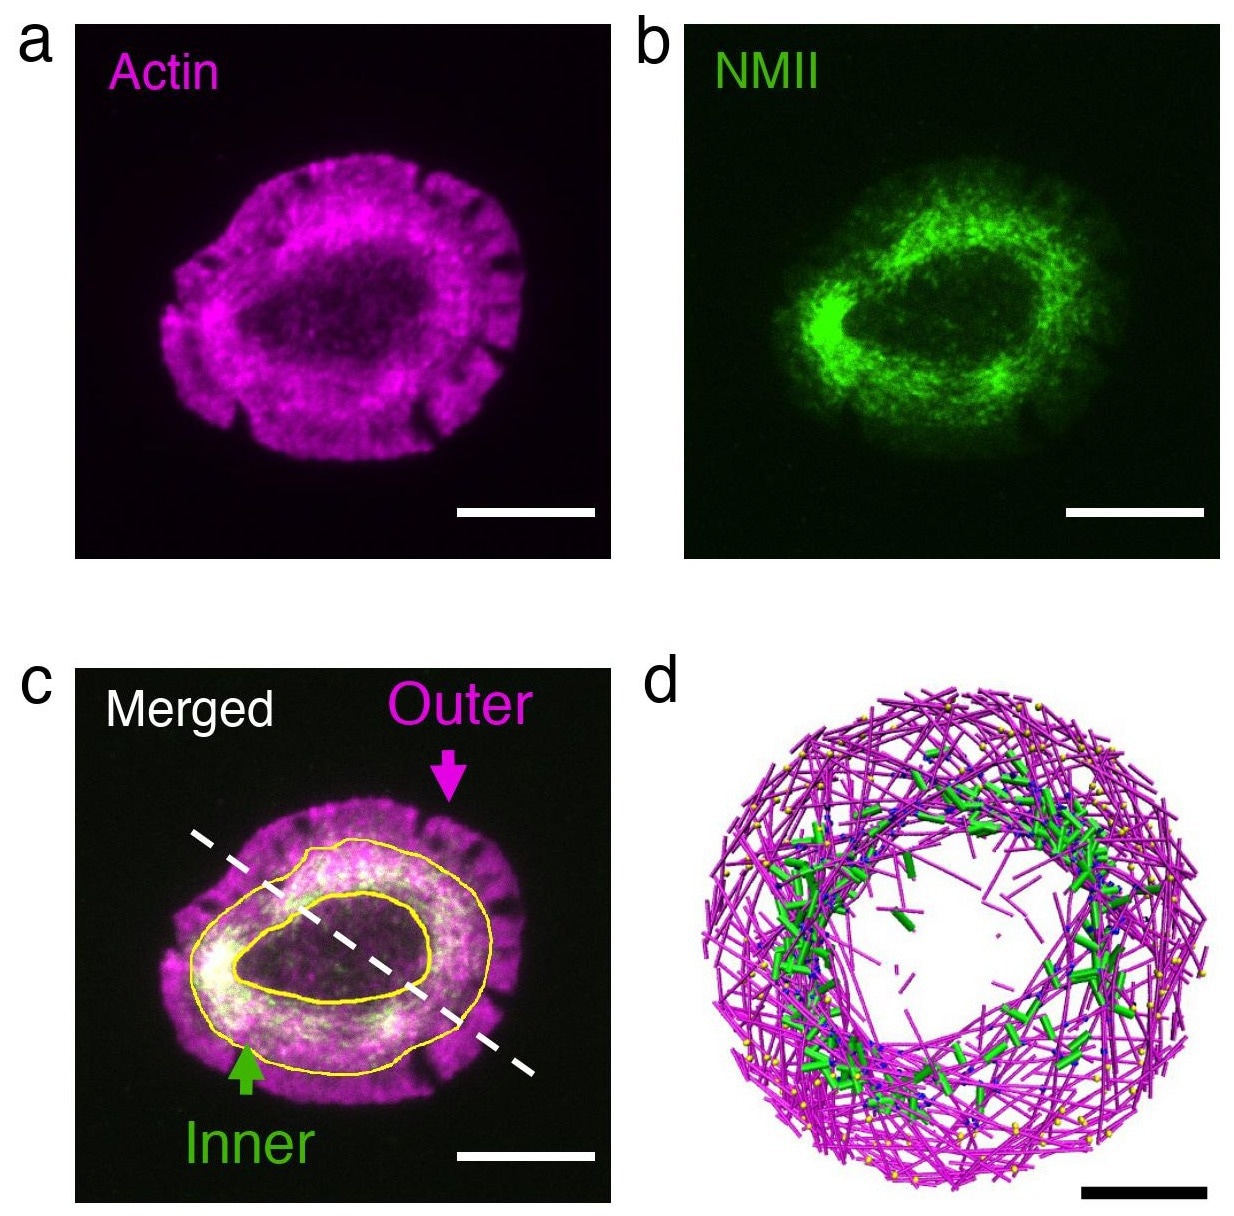 Actin serves as catalyst for shaping the cells